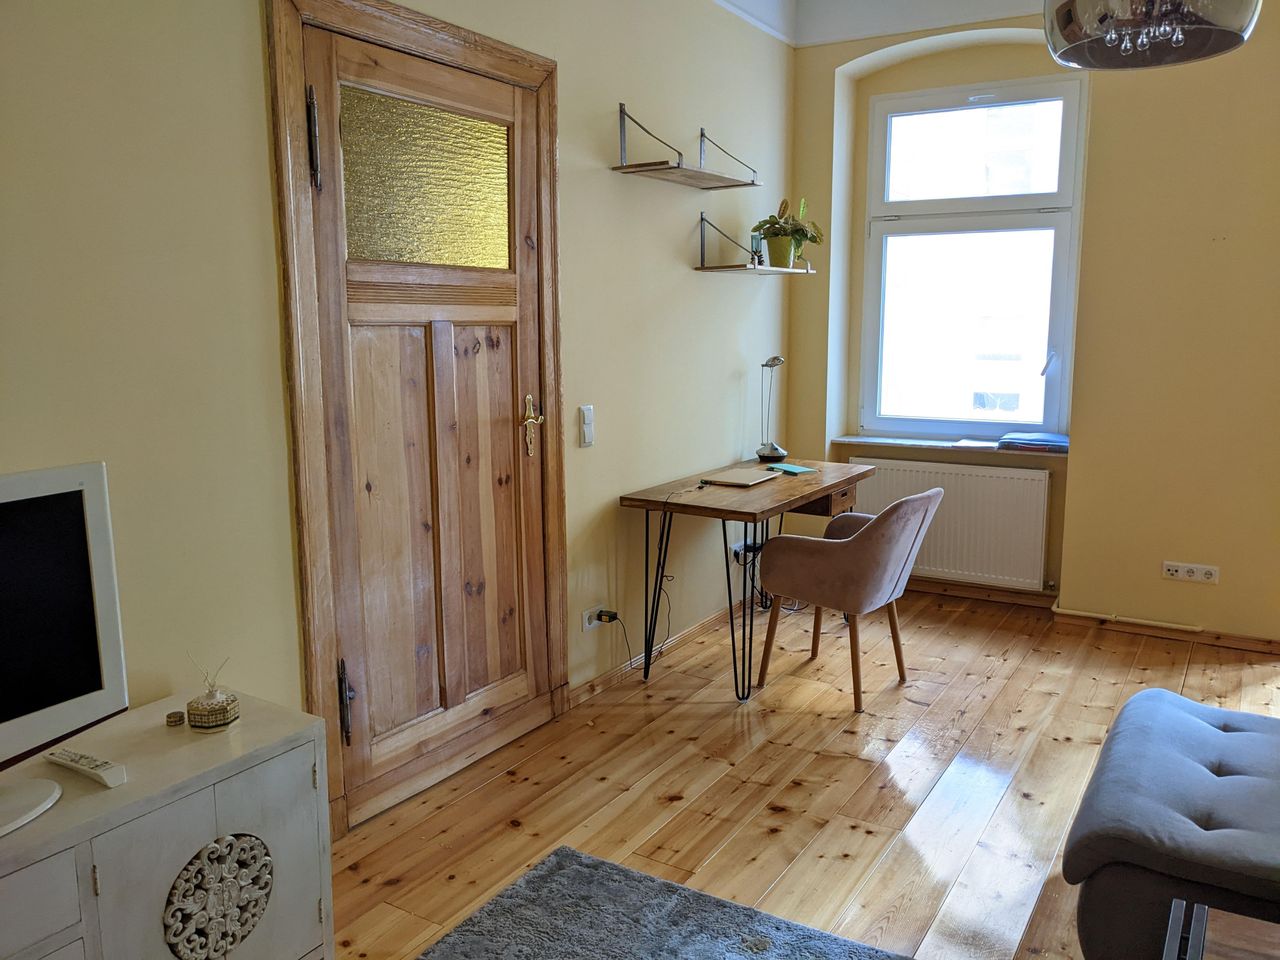 Fully Furnished 3,5 room apartment 84 m² for Sublet in Tempelhof 1950€ for 1 year starting May 1